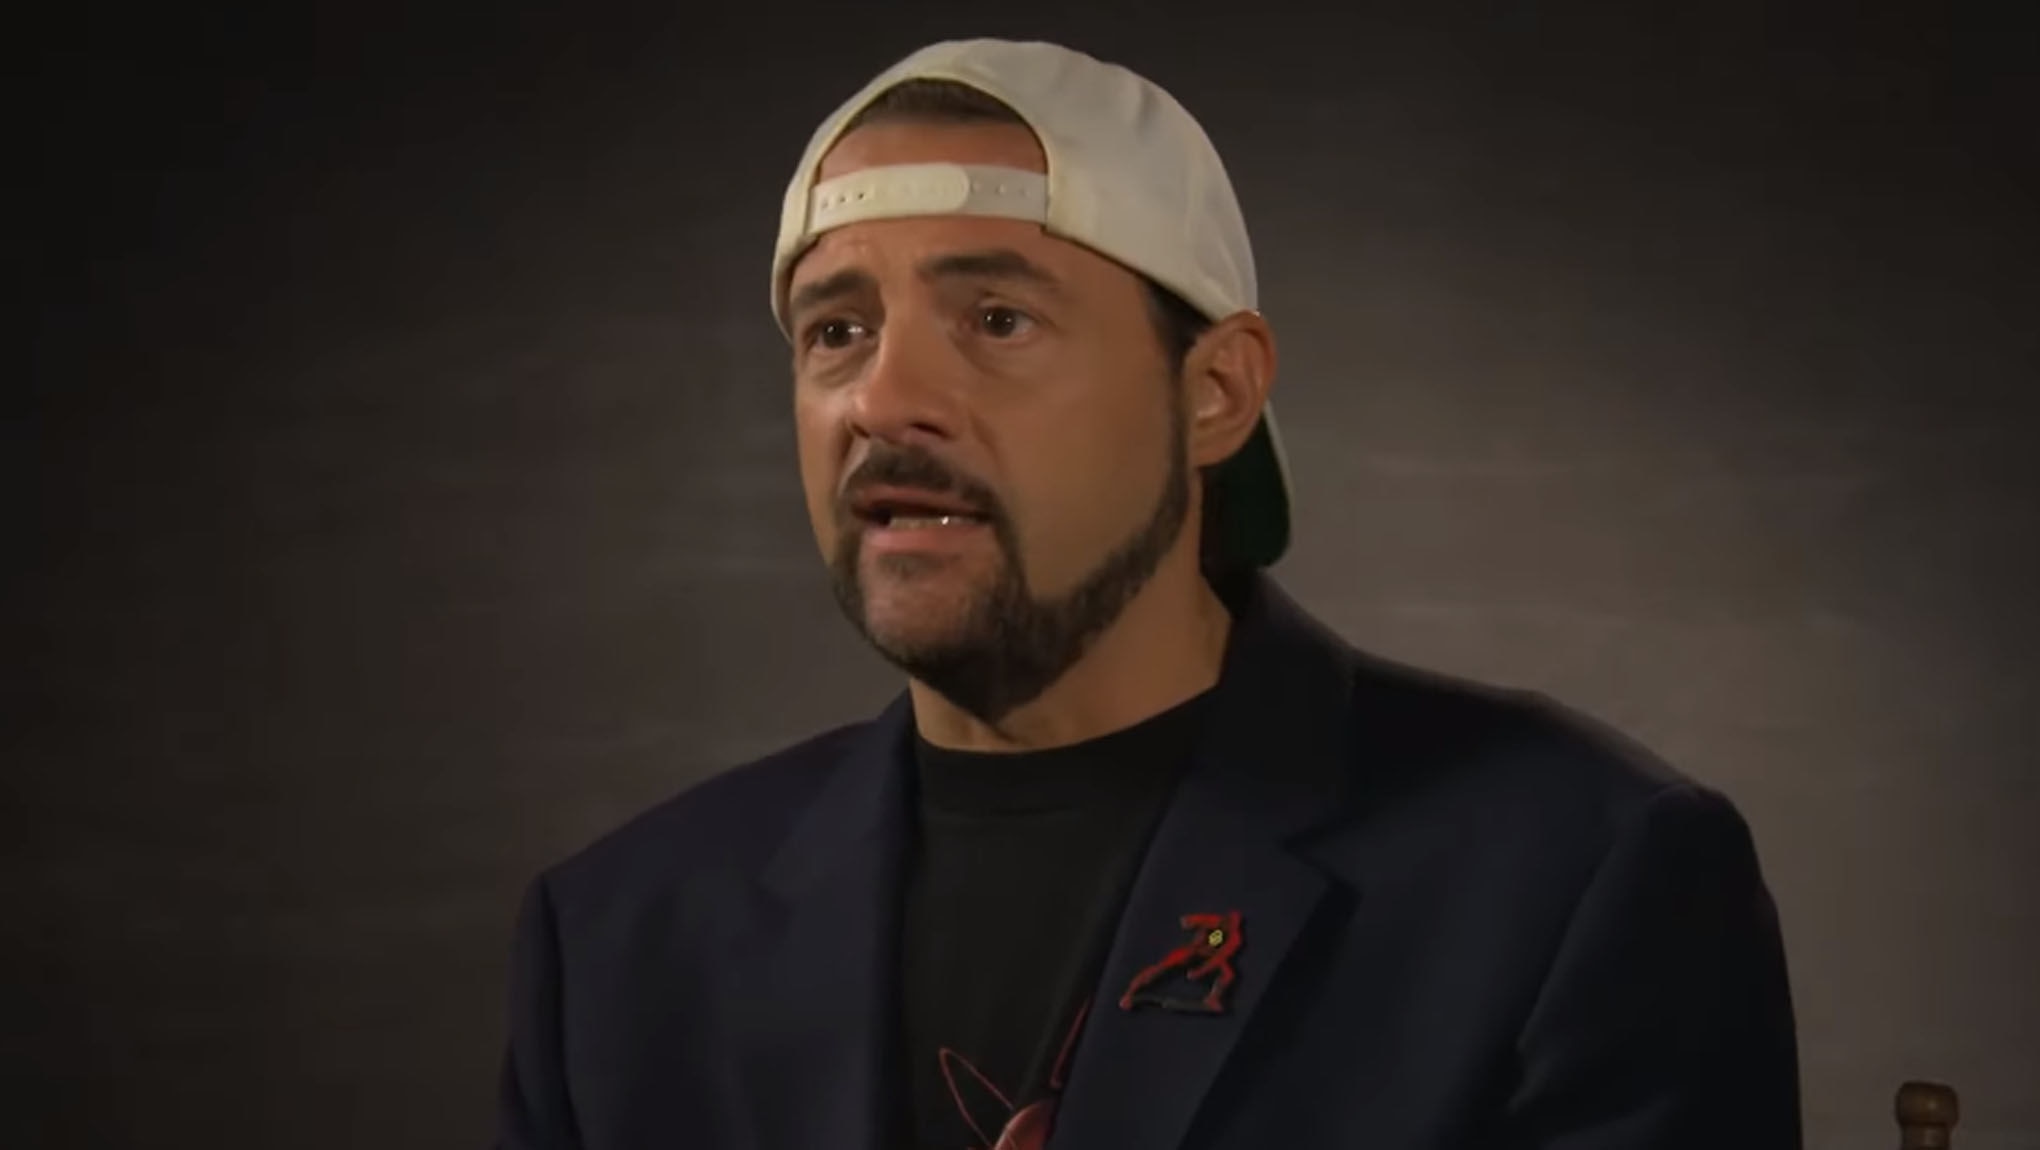 Kevin Smith on how Chris Hemsworth's Jay and Silent Bob Reboot cameo